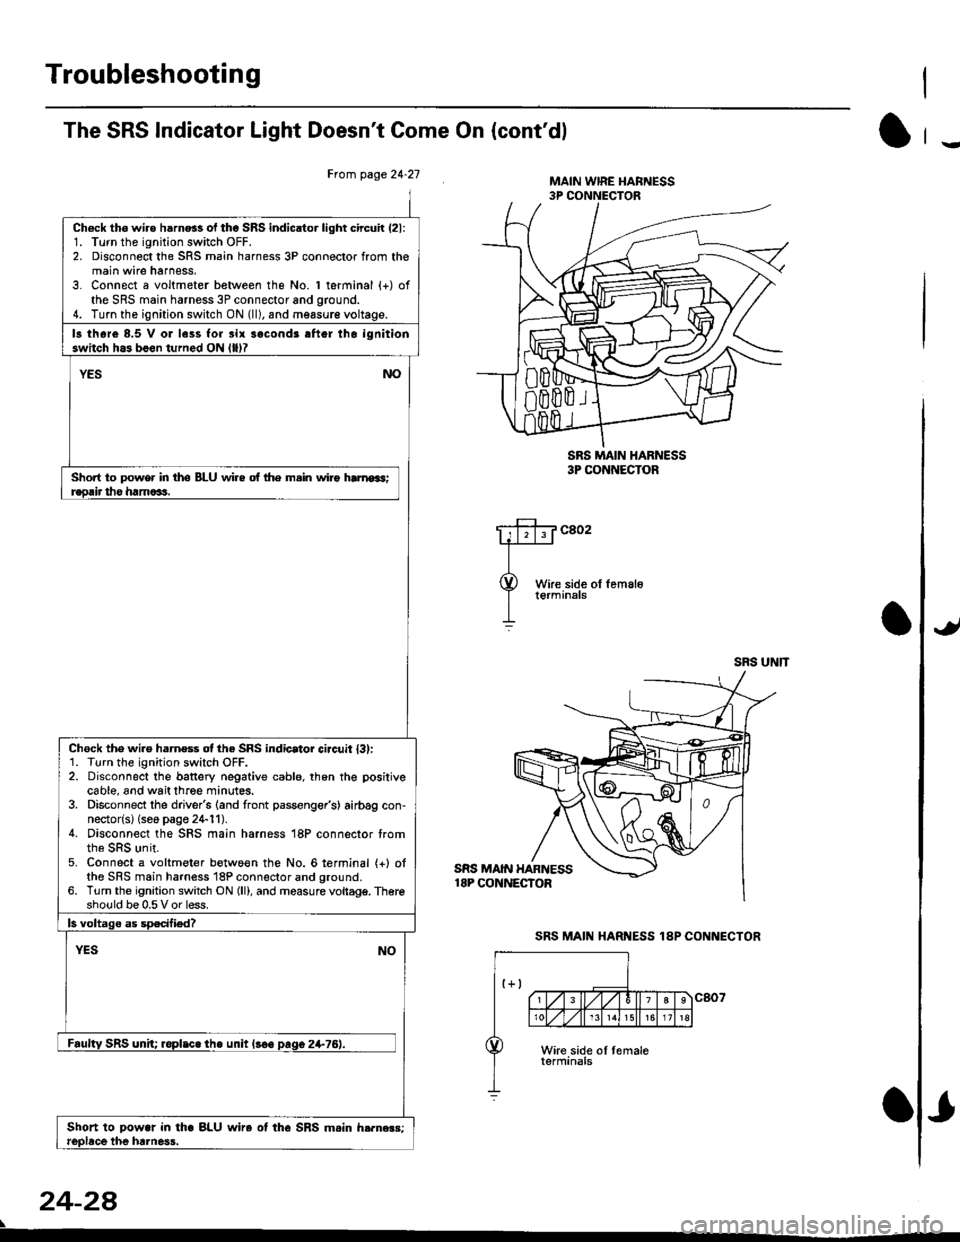 HONDA CIVIC 2000 6.G Owners Guide Troubleshooting
The SRS Indicator Light Doesnt Come On (contdl
Frcm page 24.21
Ch6ck tho wire h6rn6s of tho SRS indicator light circuir (21:
1. Turn the ignition switch OFF.2. Disconnect the SRS mai